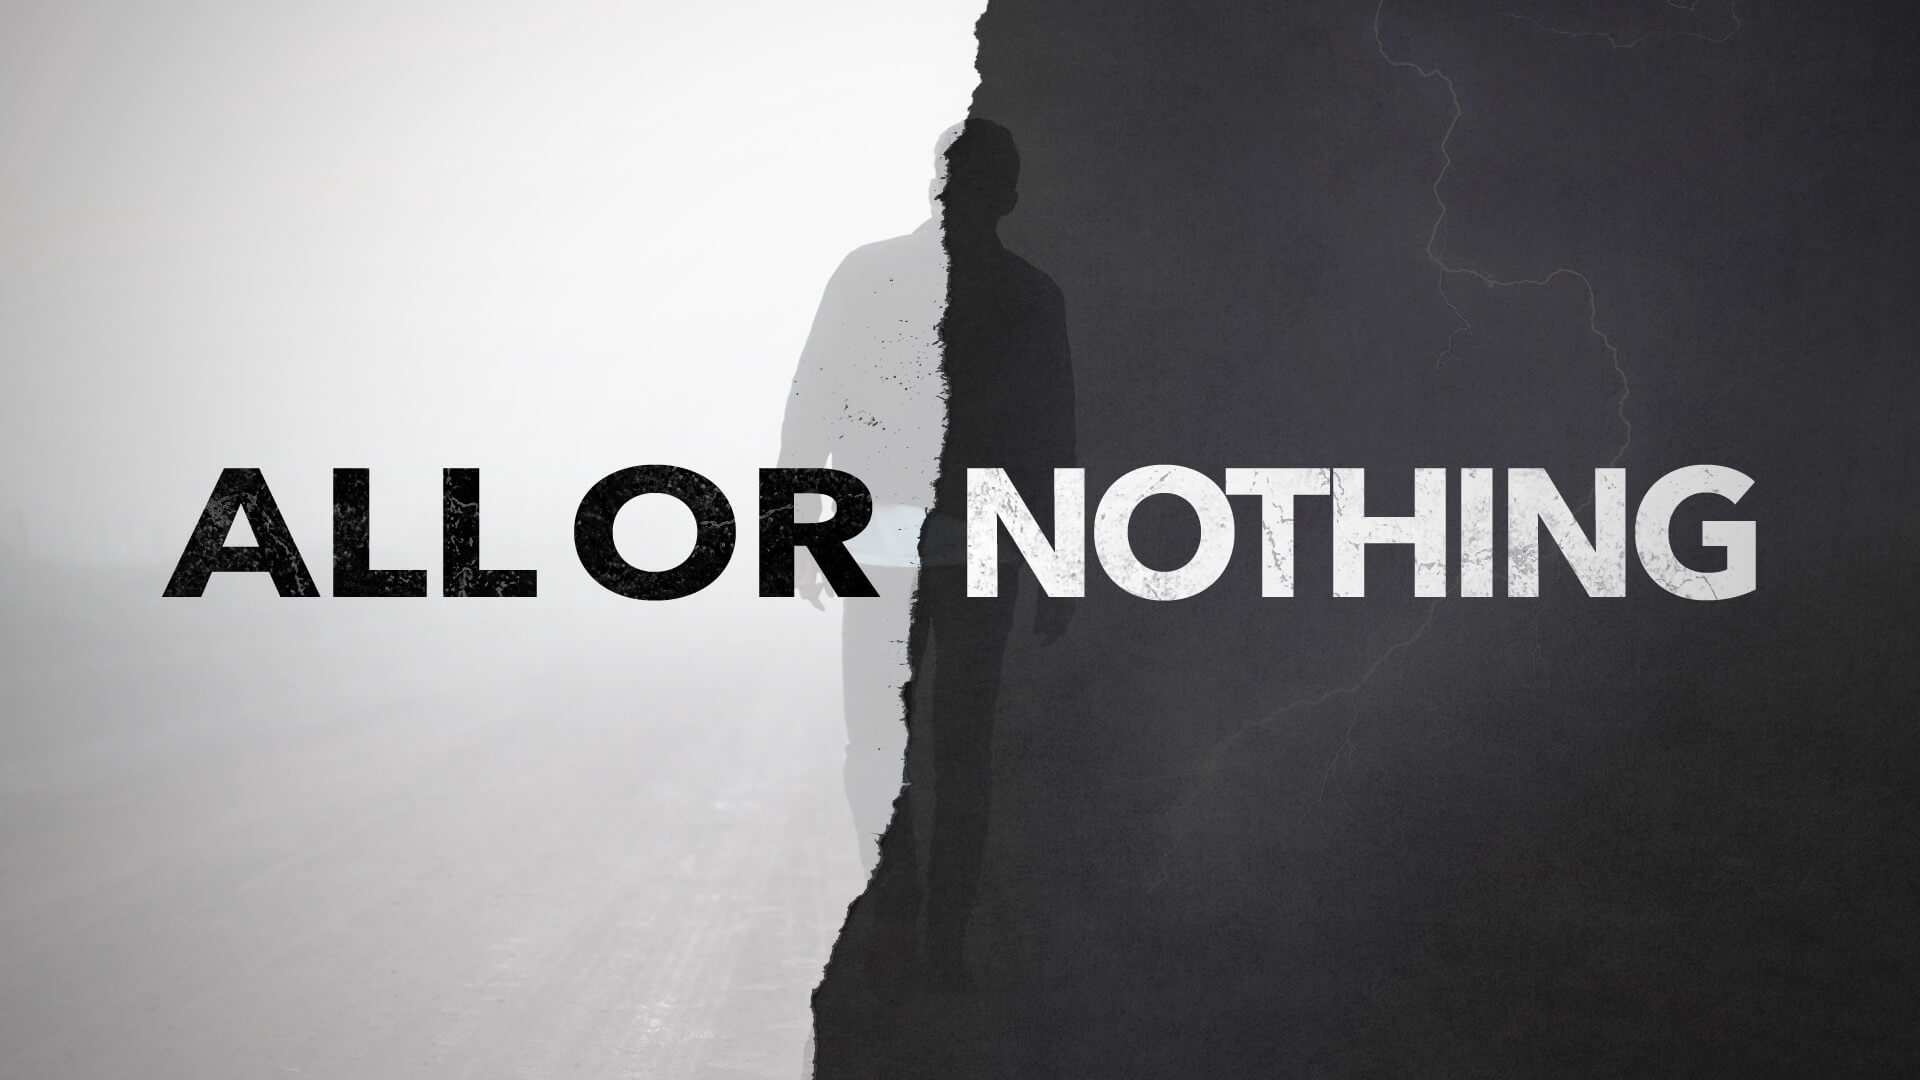 National All or Nothing Day